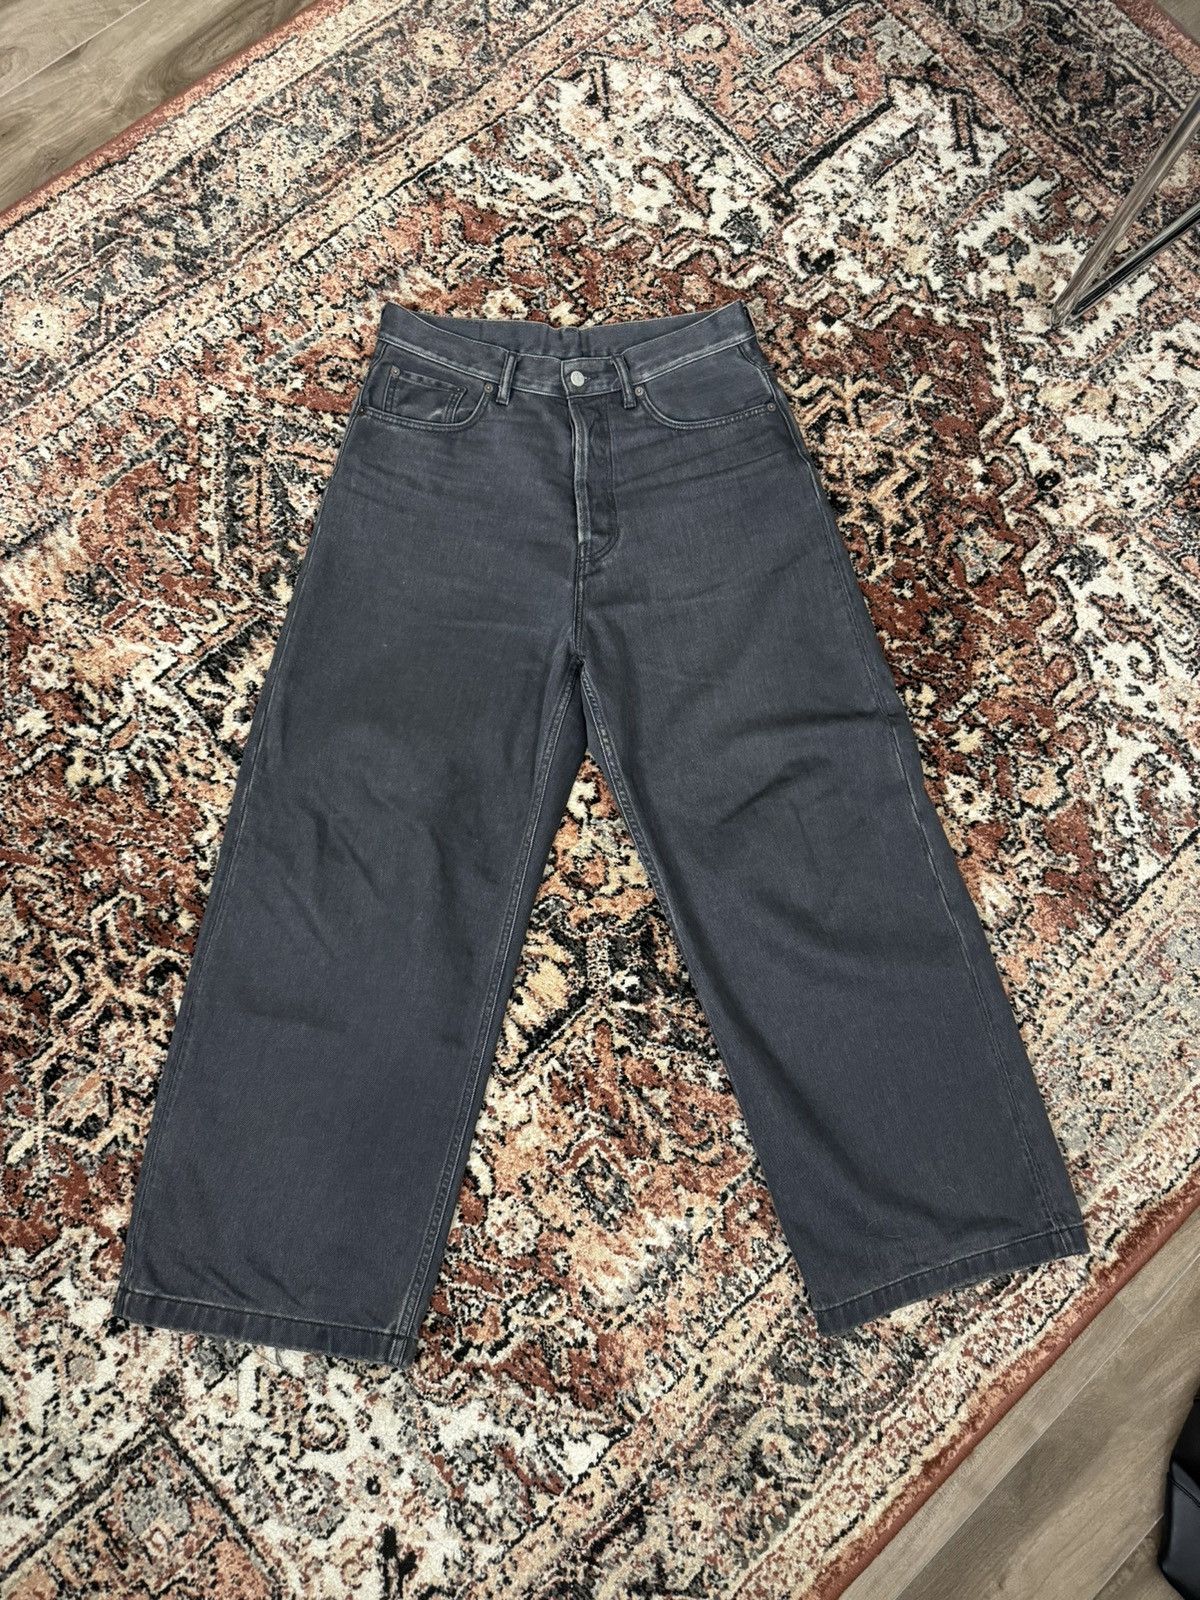 Acne Studios Loose Fit Jeans 1989 | Grailed